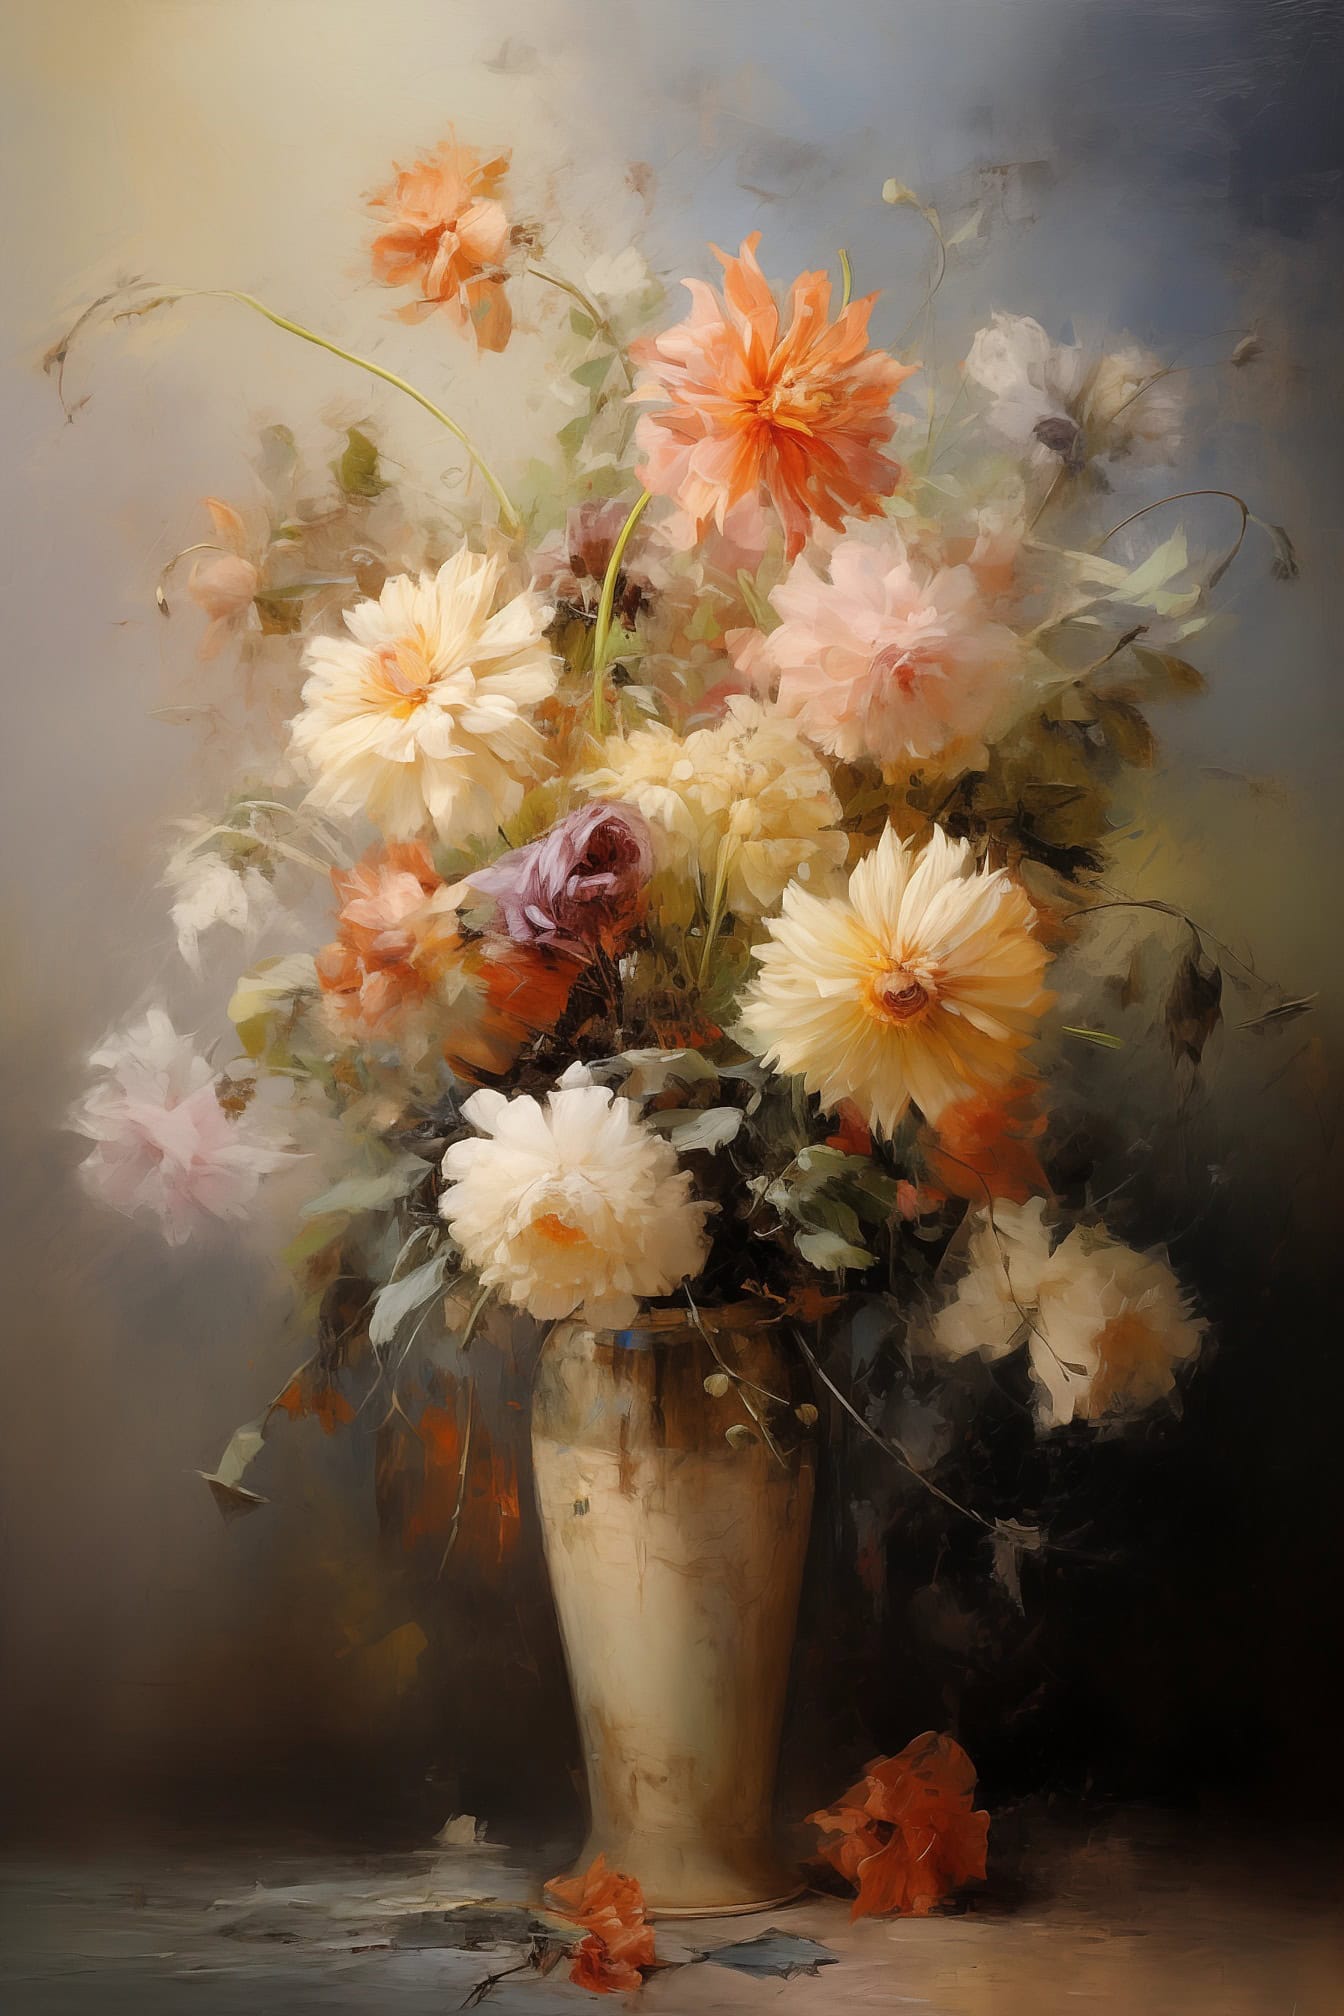 Oil painting of pastel white and orangish wildflowers in vase on floor with blurry background